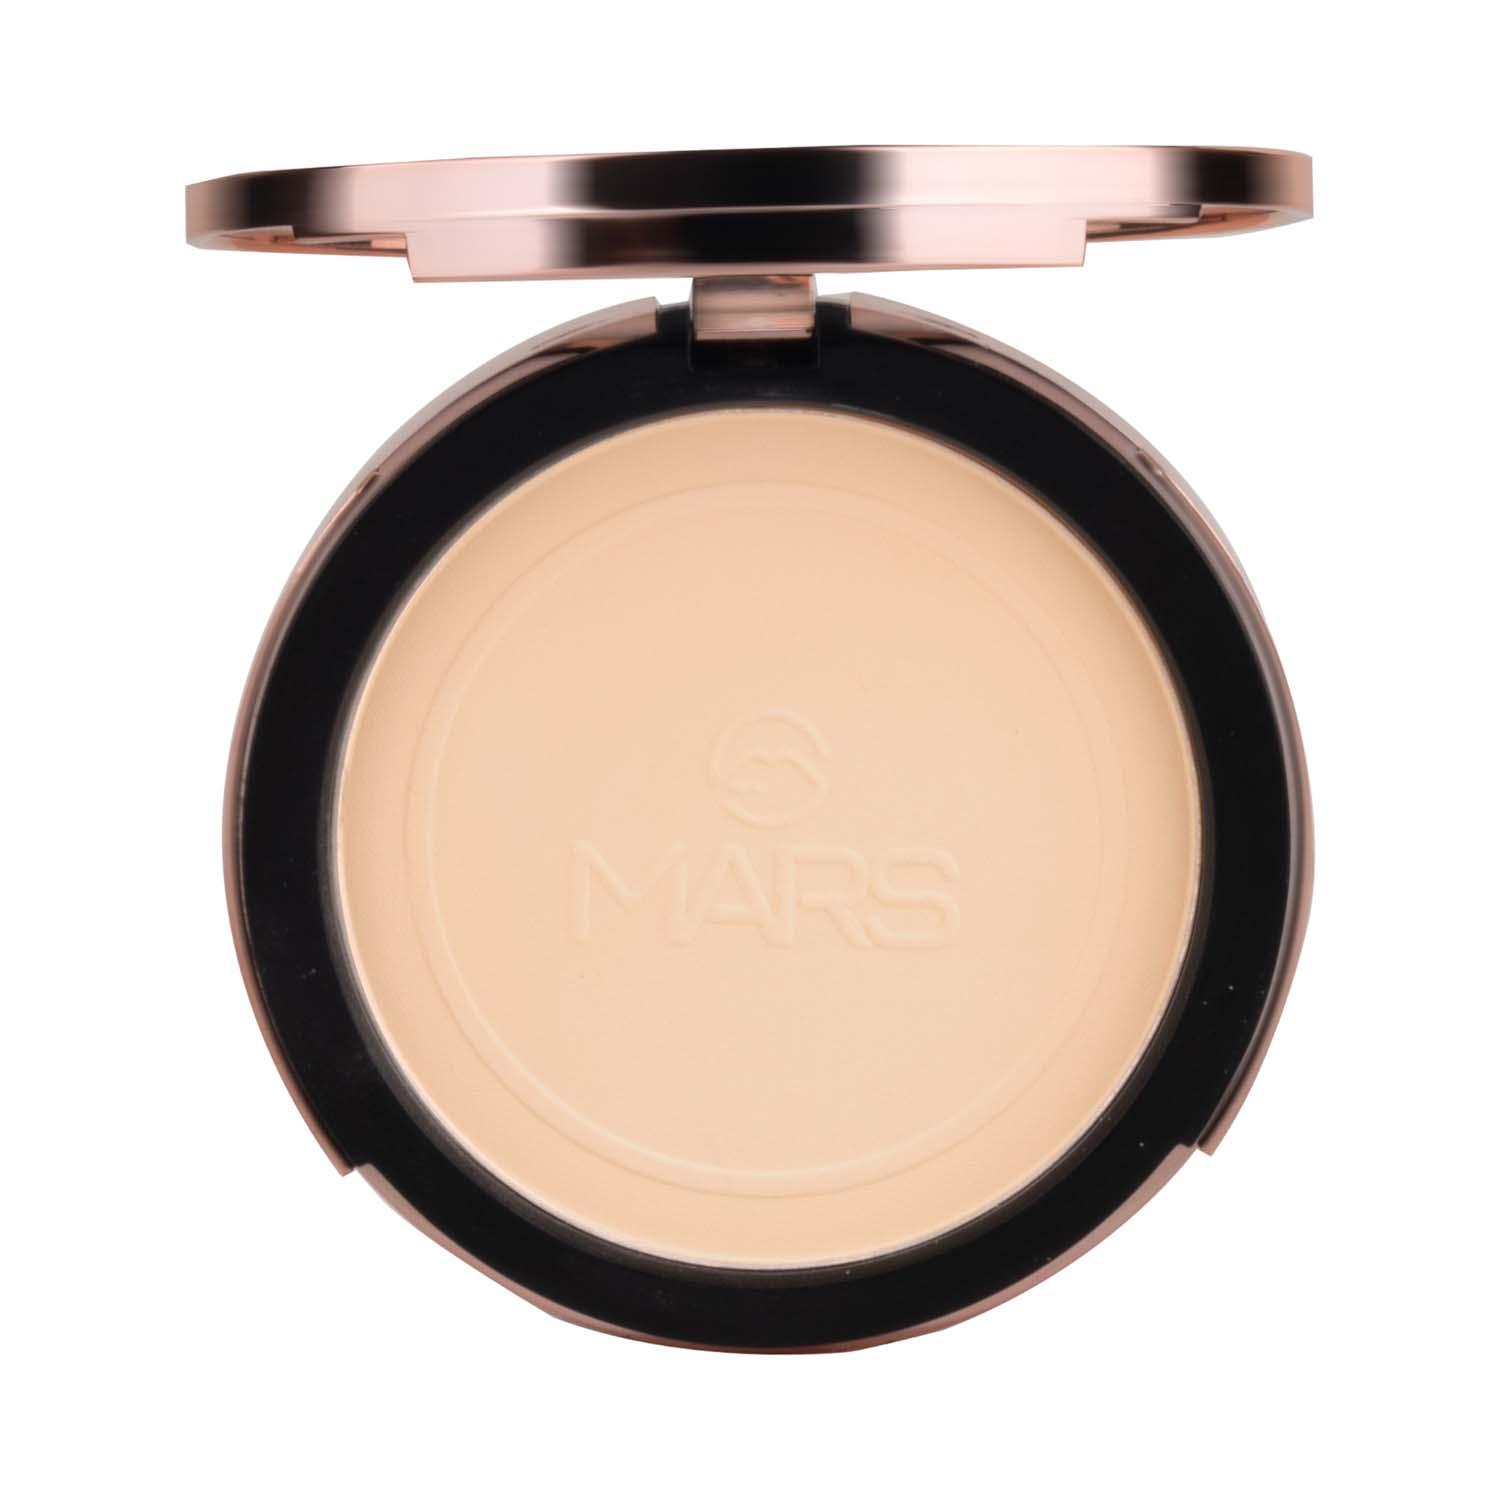 MARS | MARS Matte On Compact Powder With Puff Applicator - 03 Natural (8g)